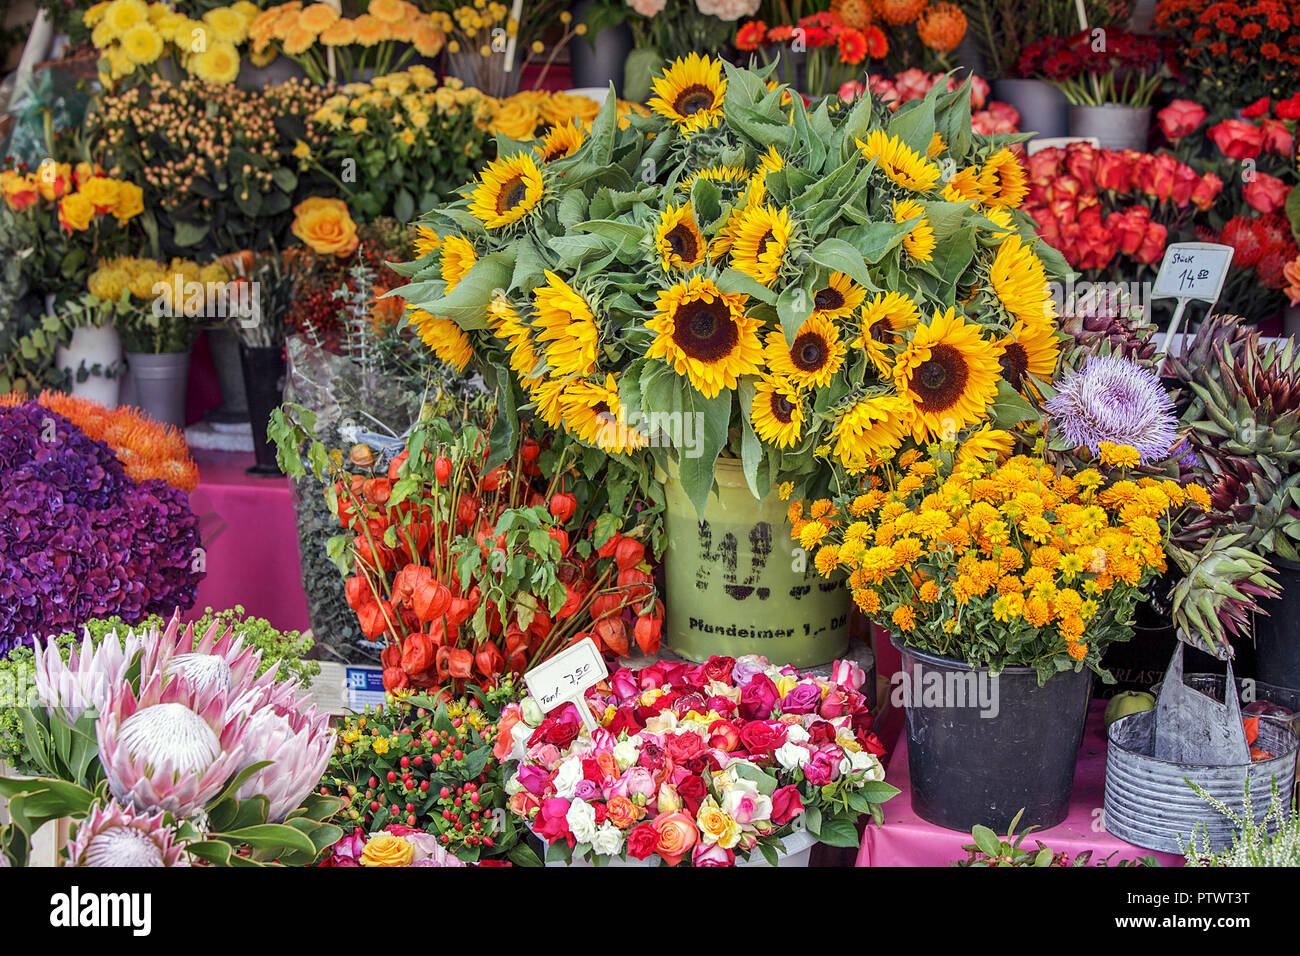 Beautiful array and display of flowers/blummen viewed here in Munich's outdoor market. Stock Photo